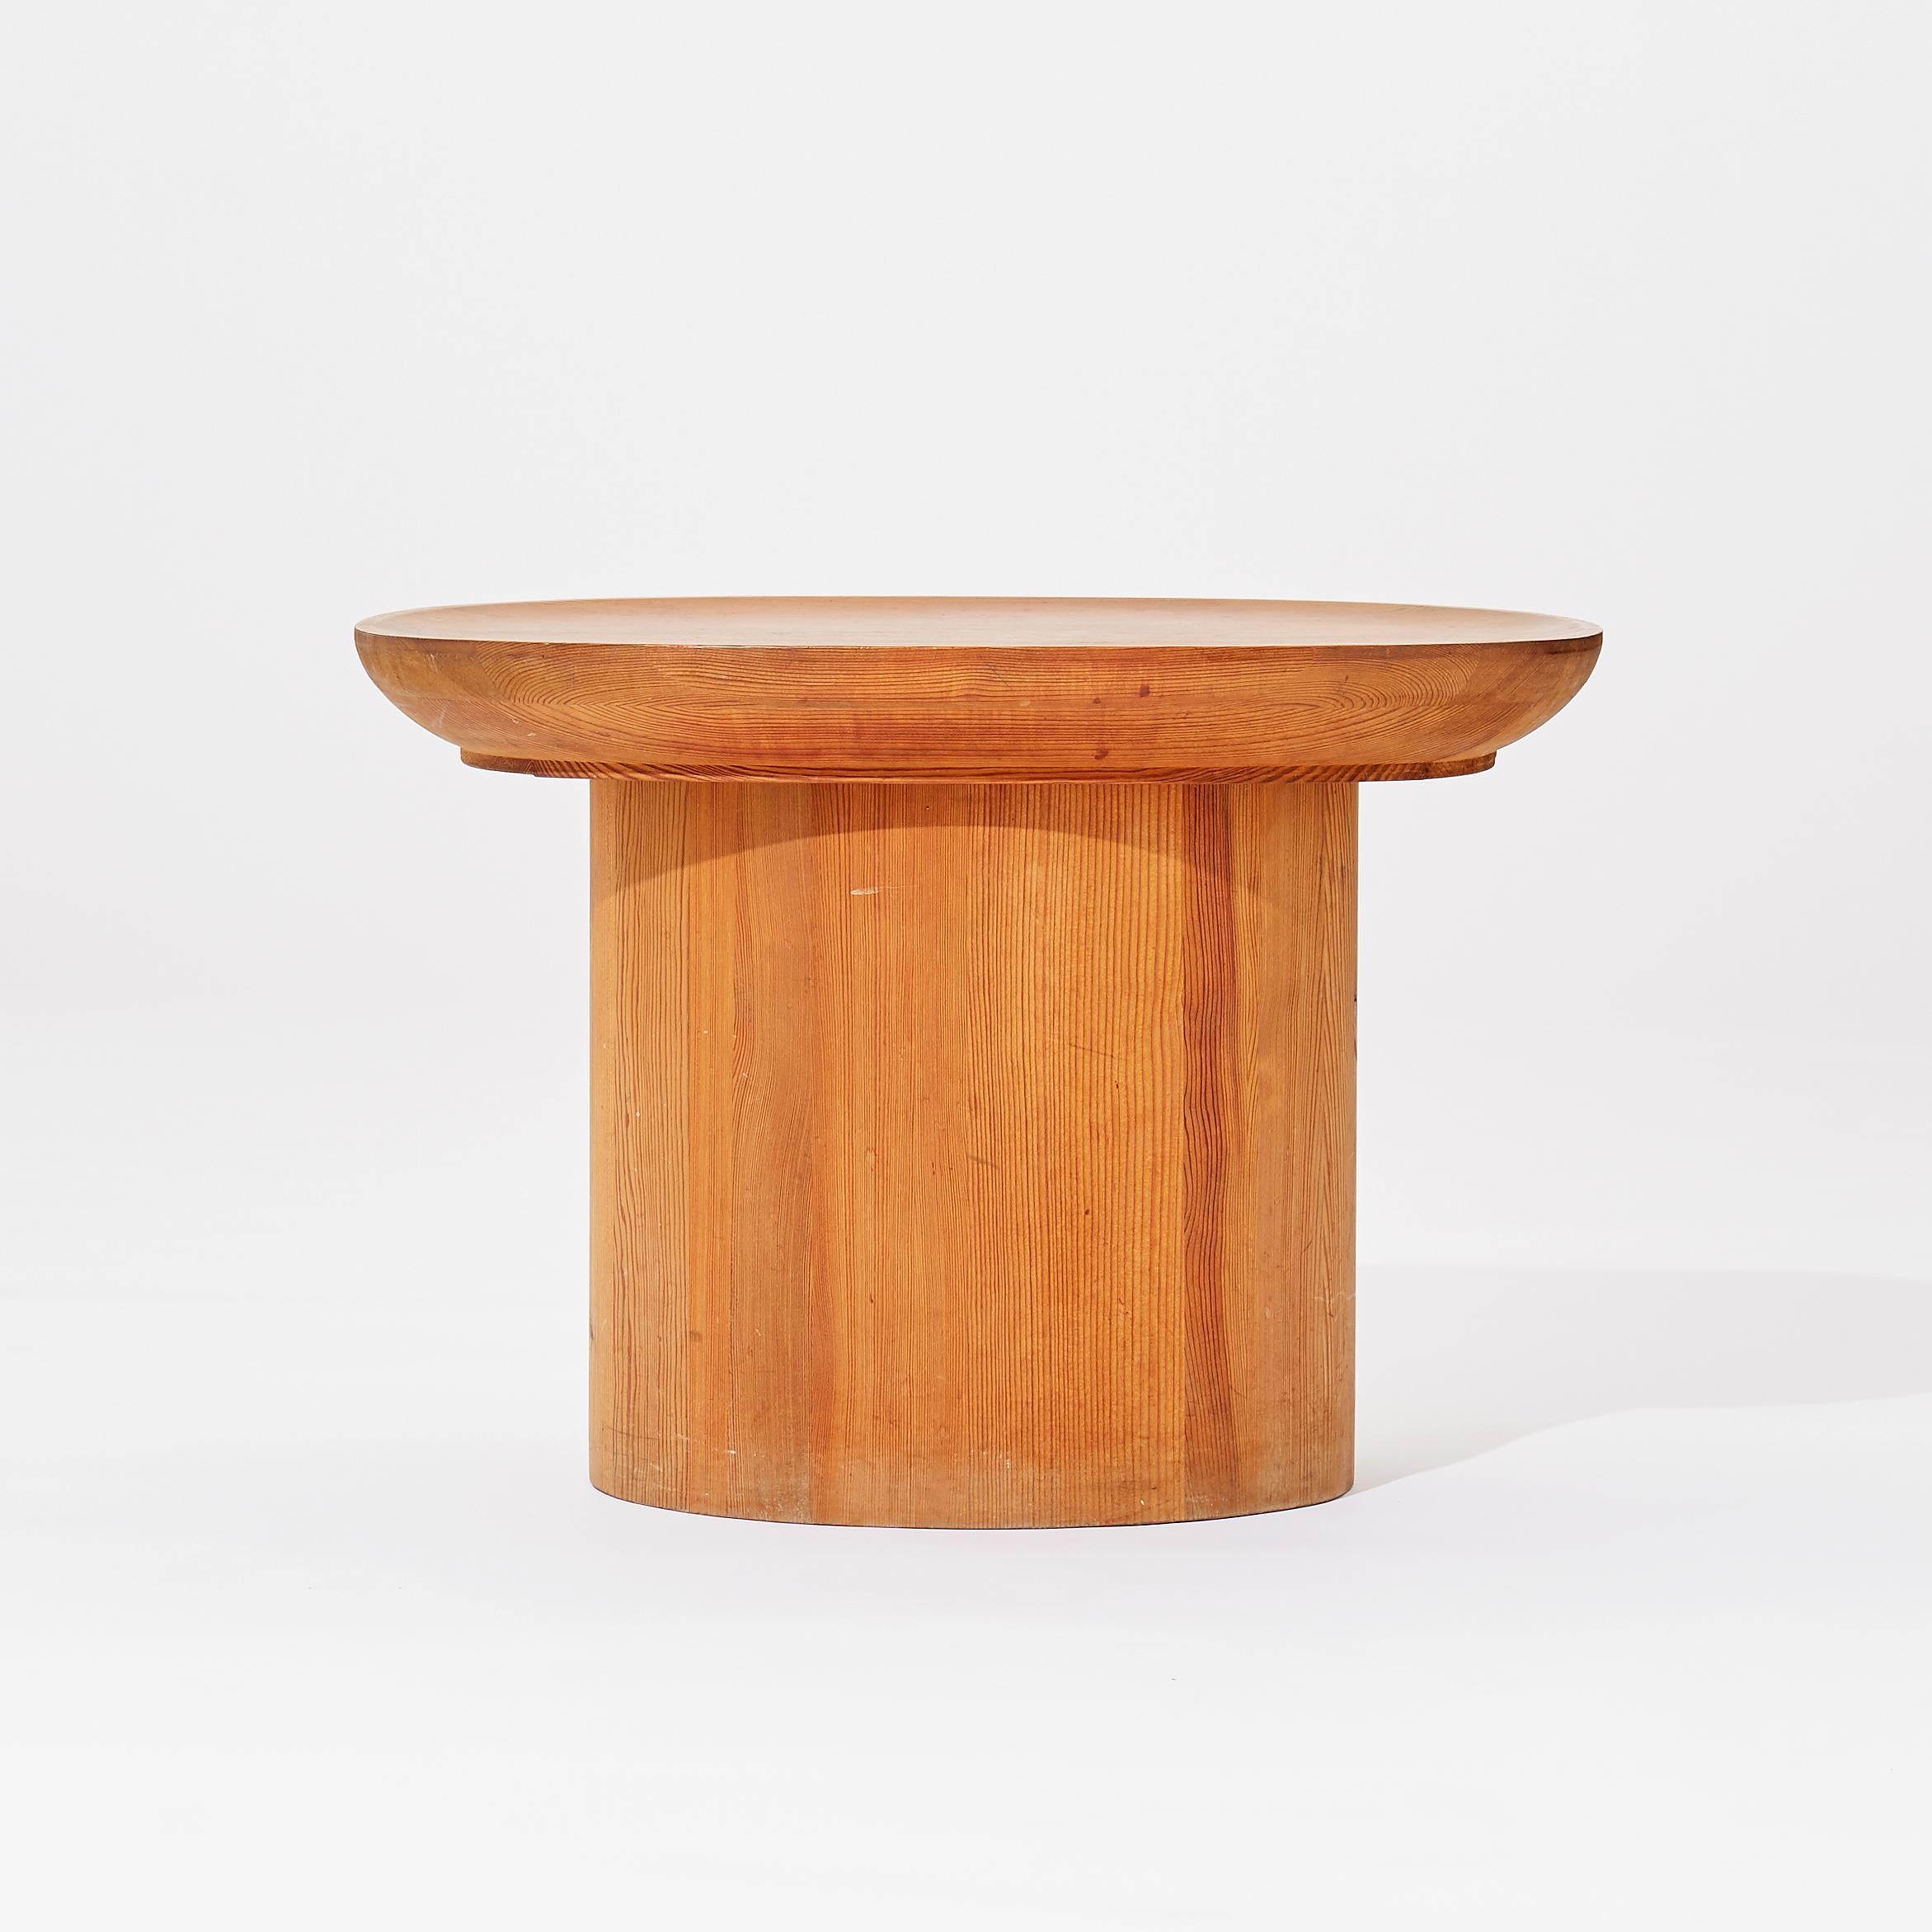 Stained pine Uto table designed by Axel Einar Hjorth, and produced by Nordiska Kompaniet in Sweden 1930s.